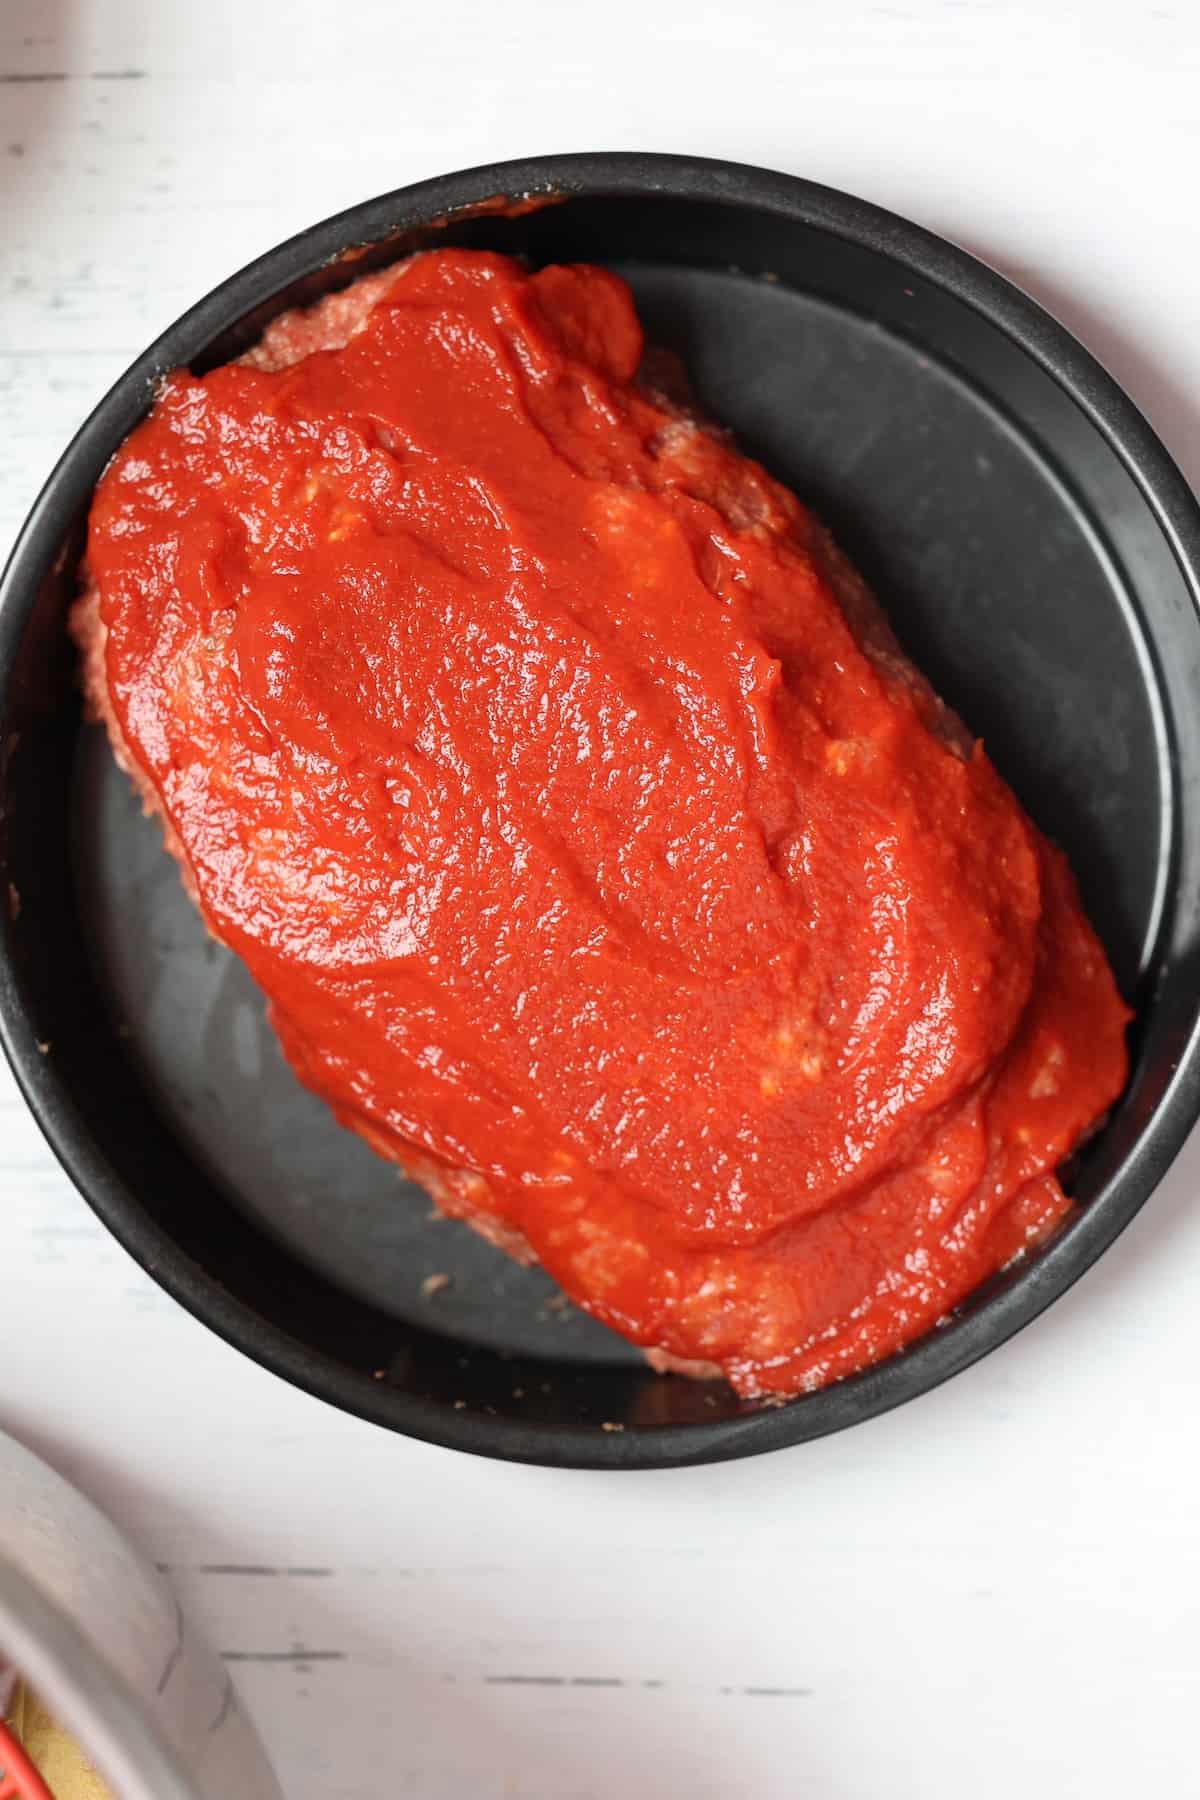 uncooked meatloaf topped with tomato sauce glaze